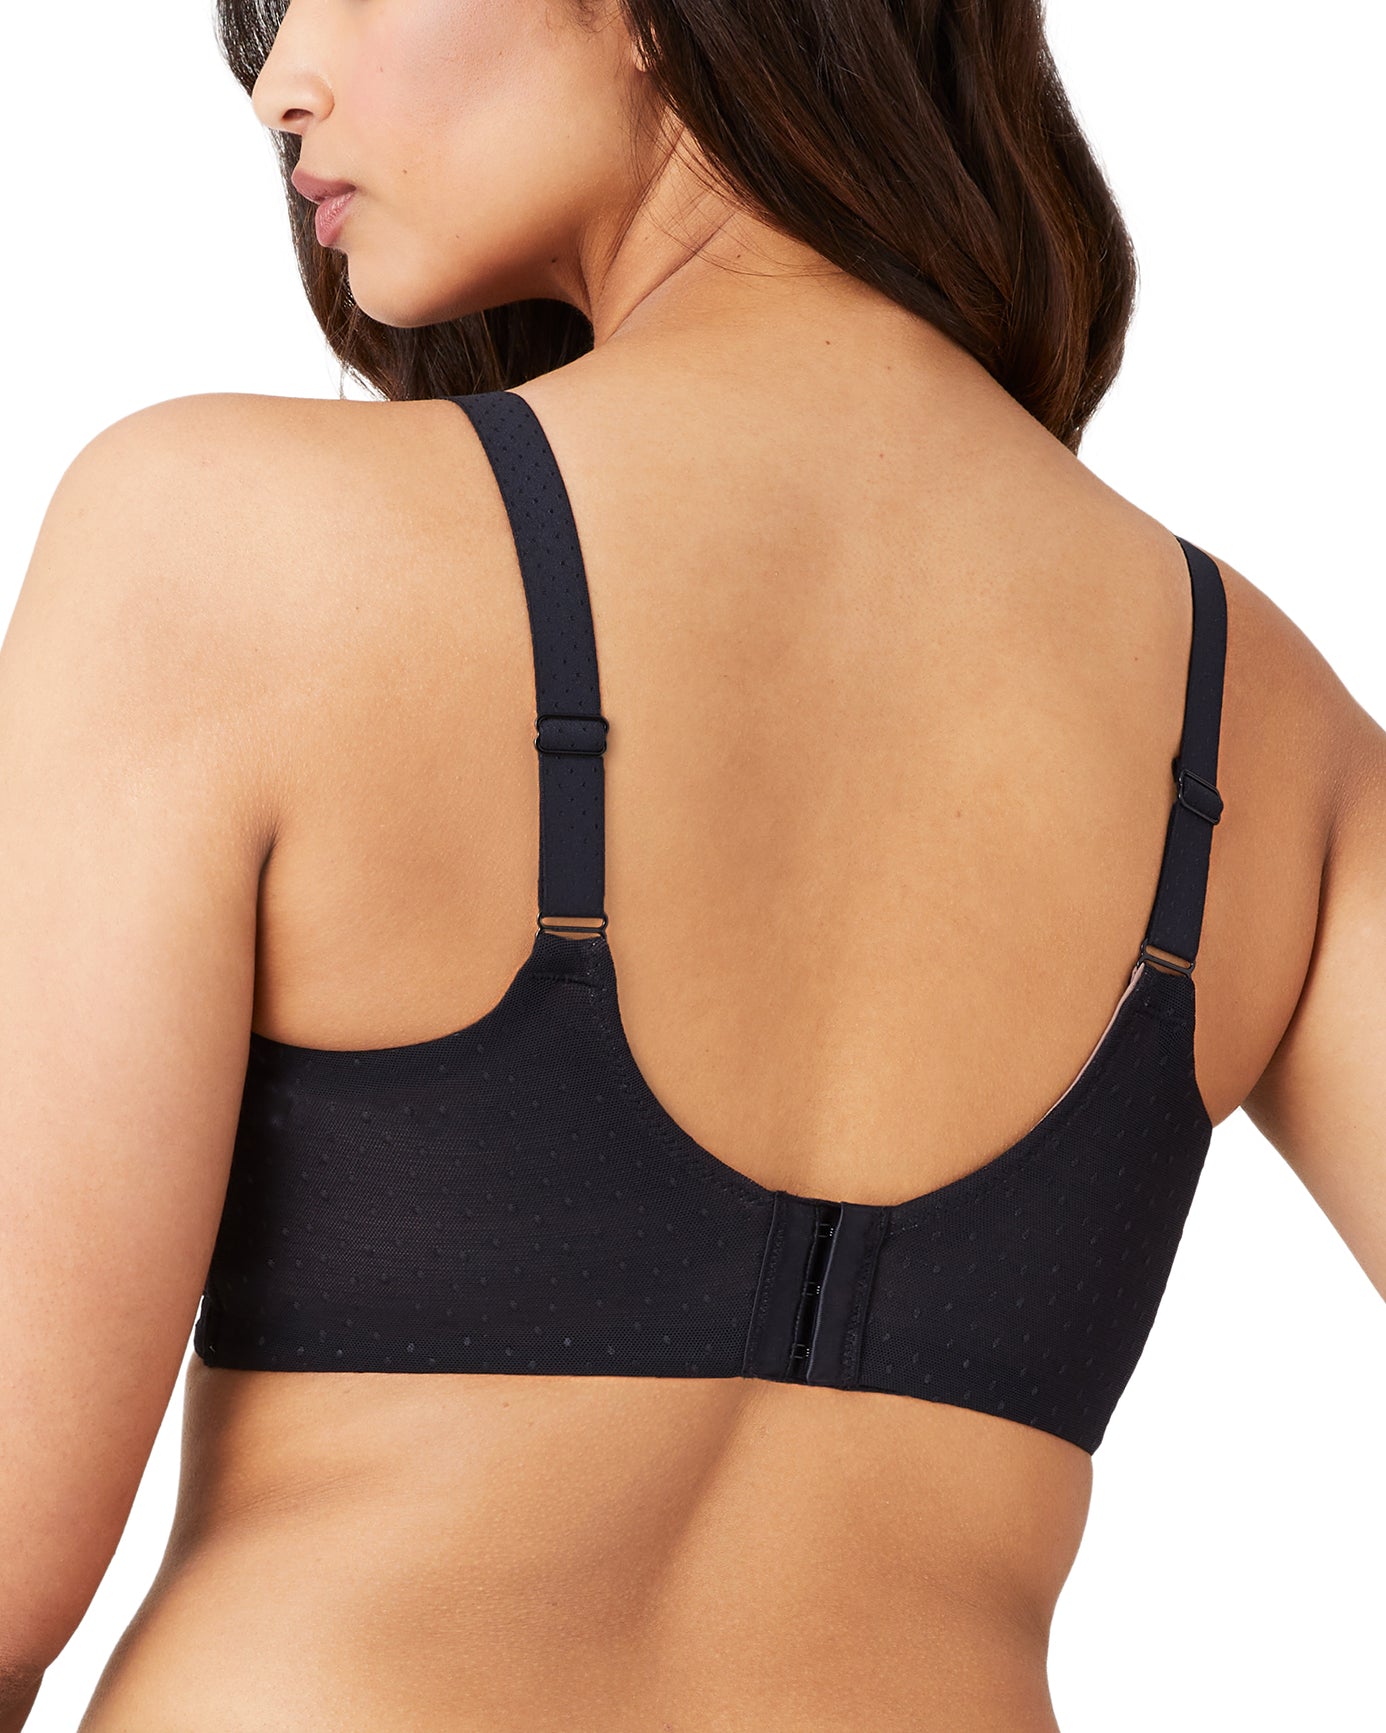 Wacoal Back Appeal Wire Free T-Shirt Bra (More colors available) - 856303